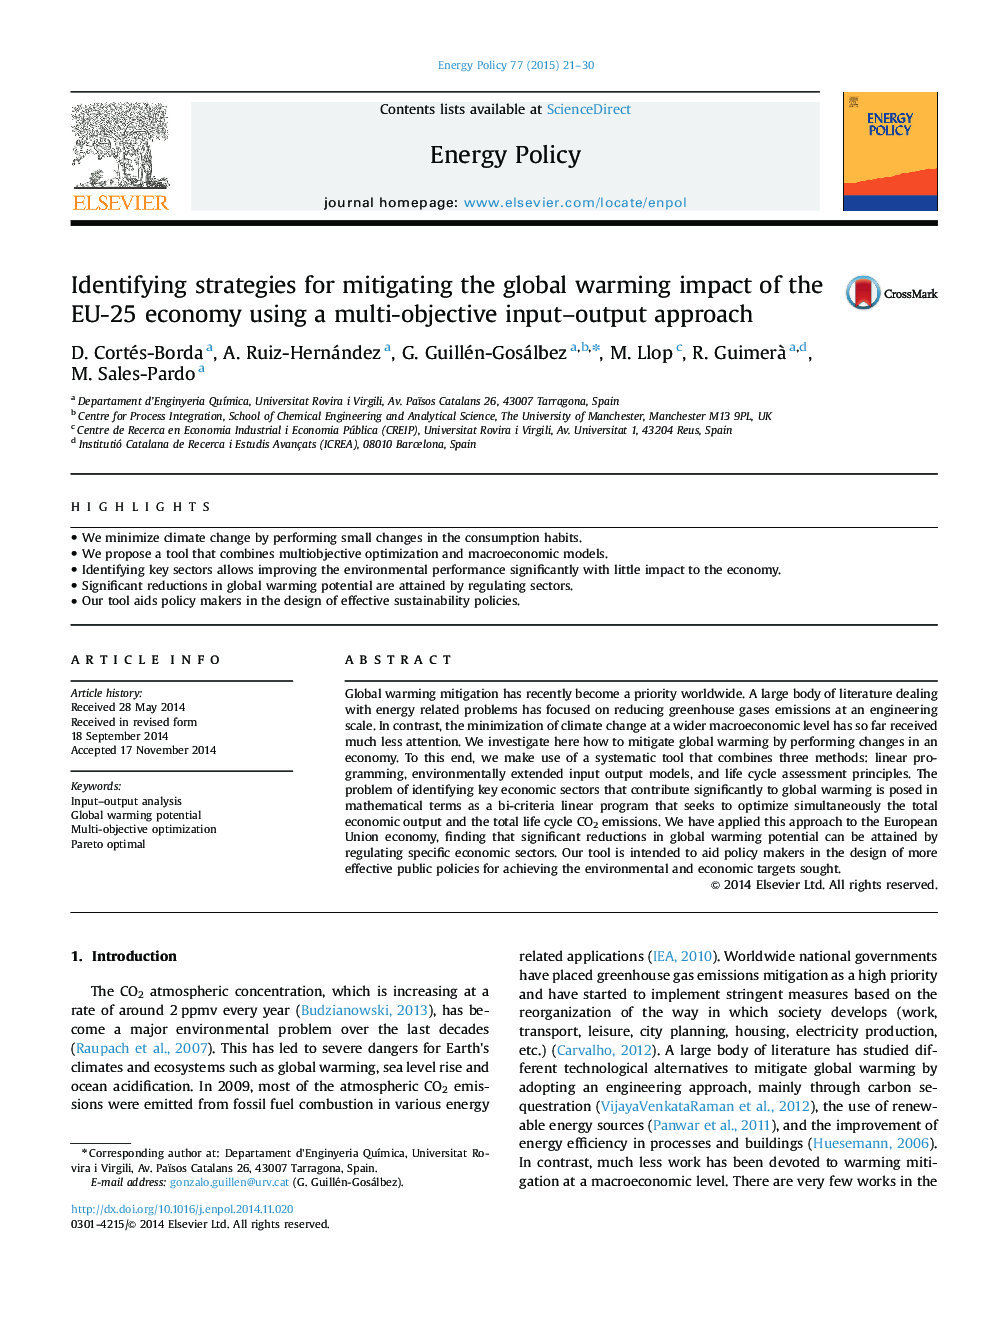 Identifying strategies for mitigating the global warming impact of the EU-25 economy using a multi-objective input-output approach